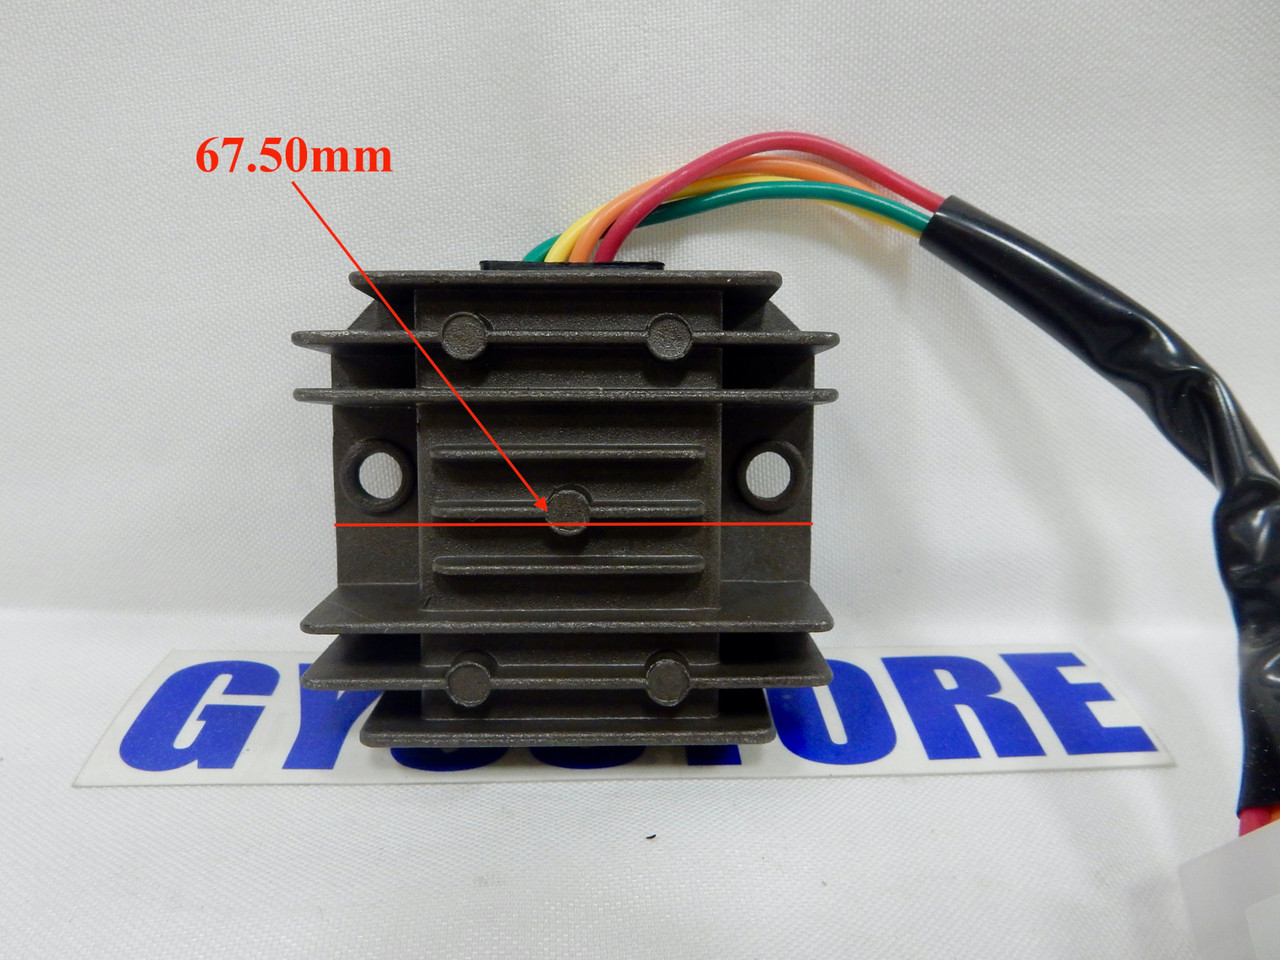 12V 4 WIRE / 4 PIN VOLTAGE REGULATOR RECTIFIER FOR SCOOTERS MOTORCYCLES BIKES